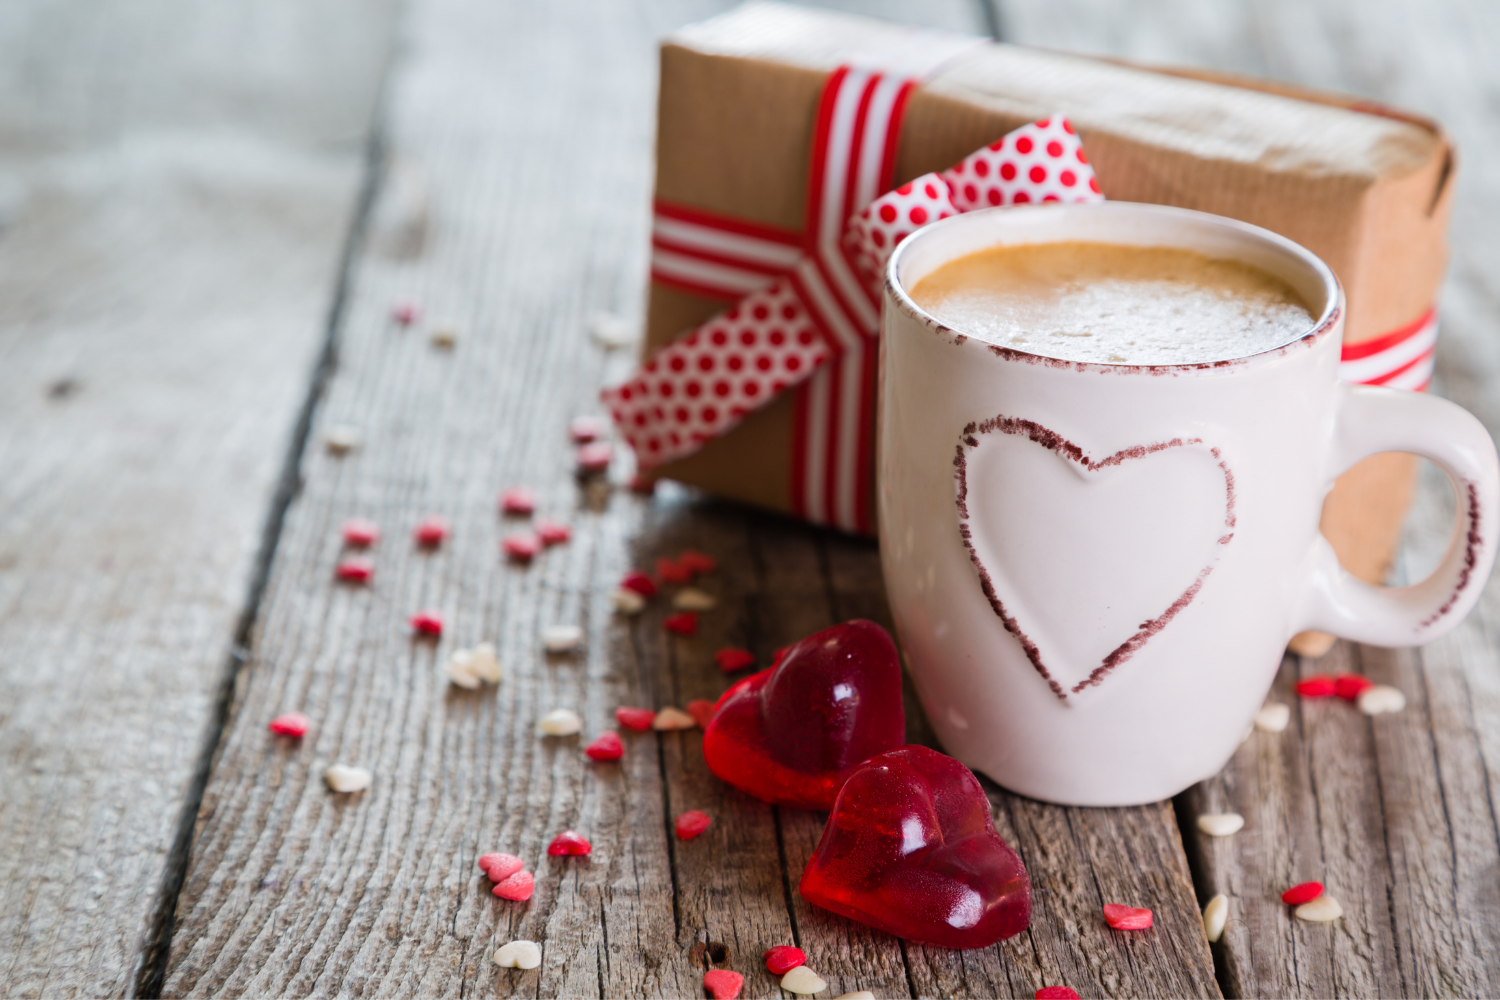 How To Celebrate Valentine's Day When You're Single